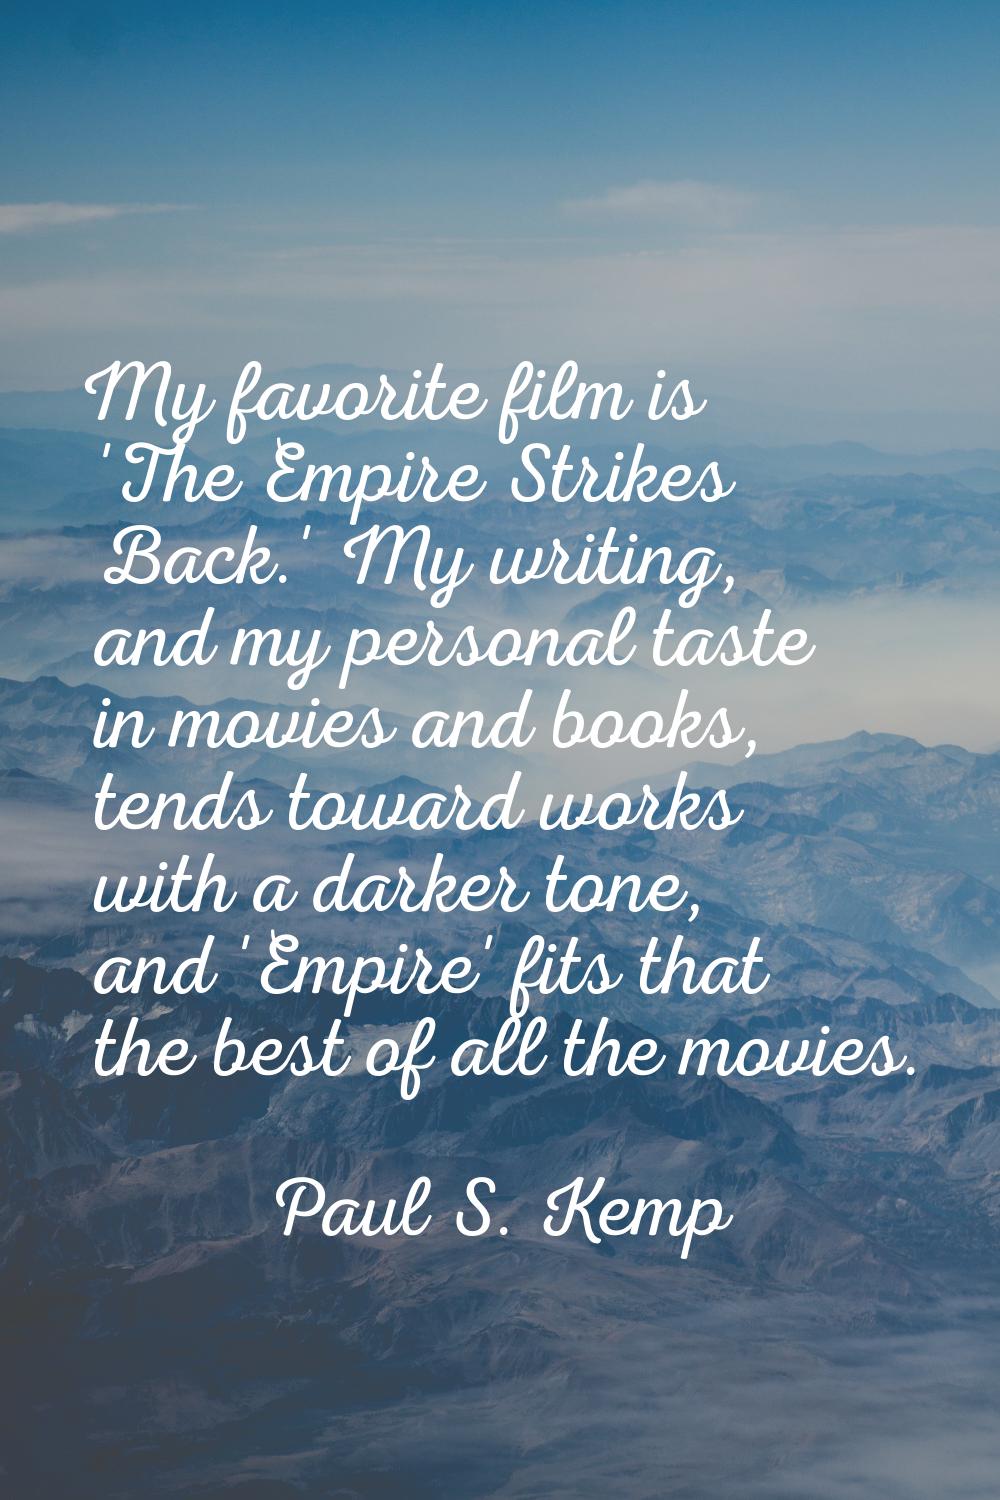 My favorite film is 'The Empire Strikes Back.' My writing, and my personal taste in movies and book